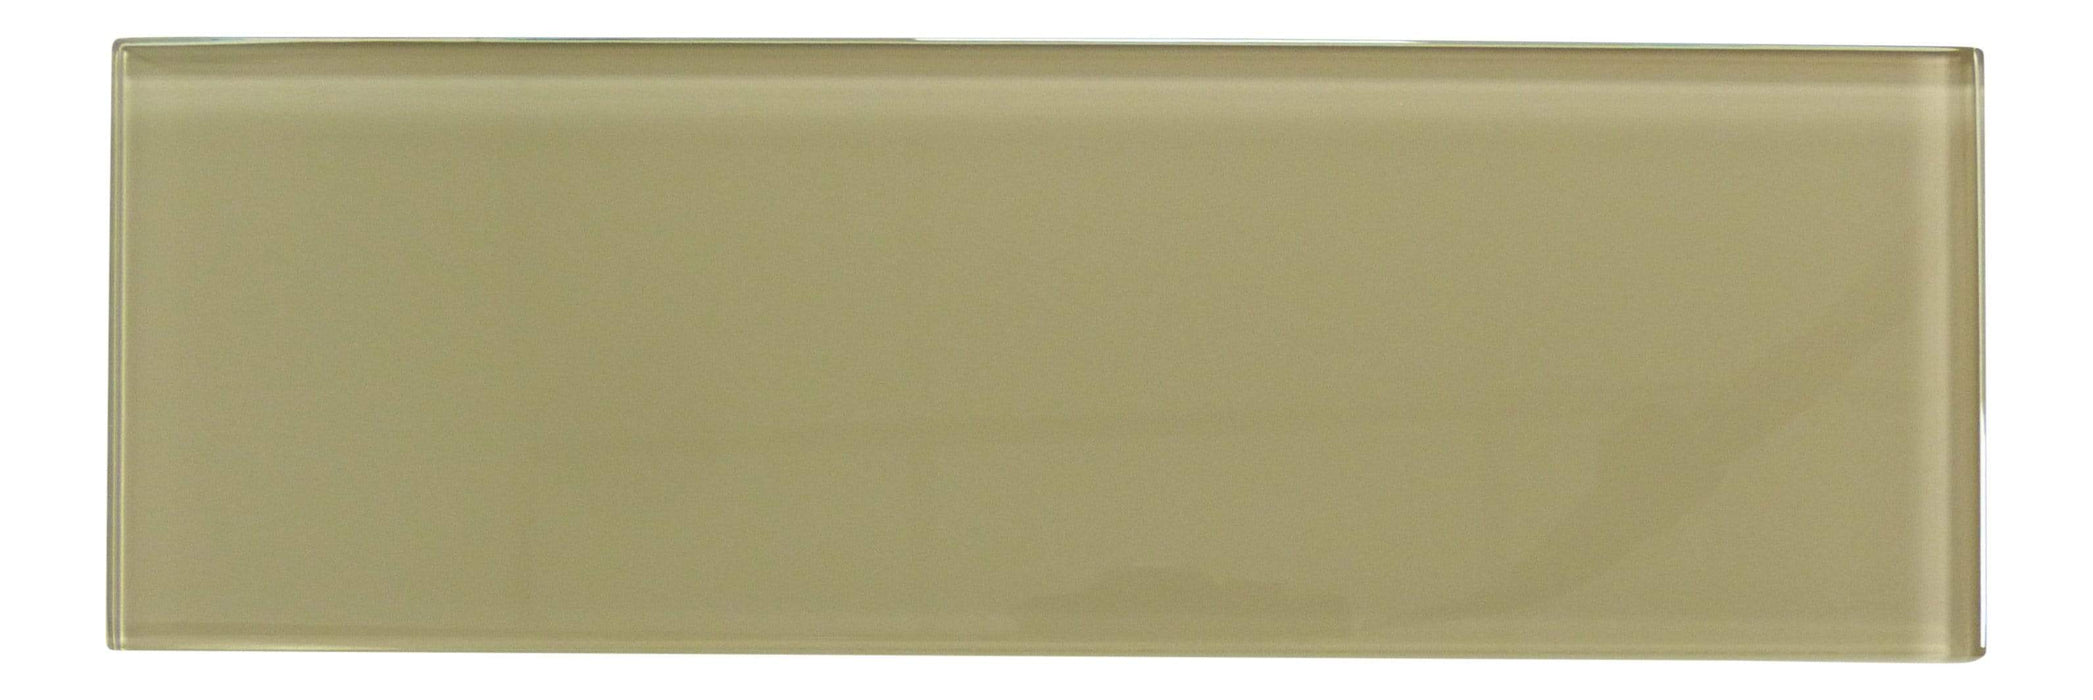 Light Taupe 4" x 12" Glossy Glass Subway Tile Pacific Tile